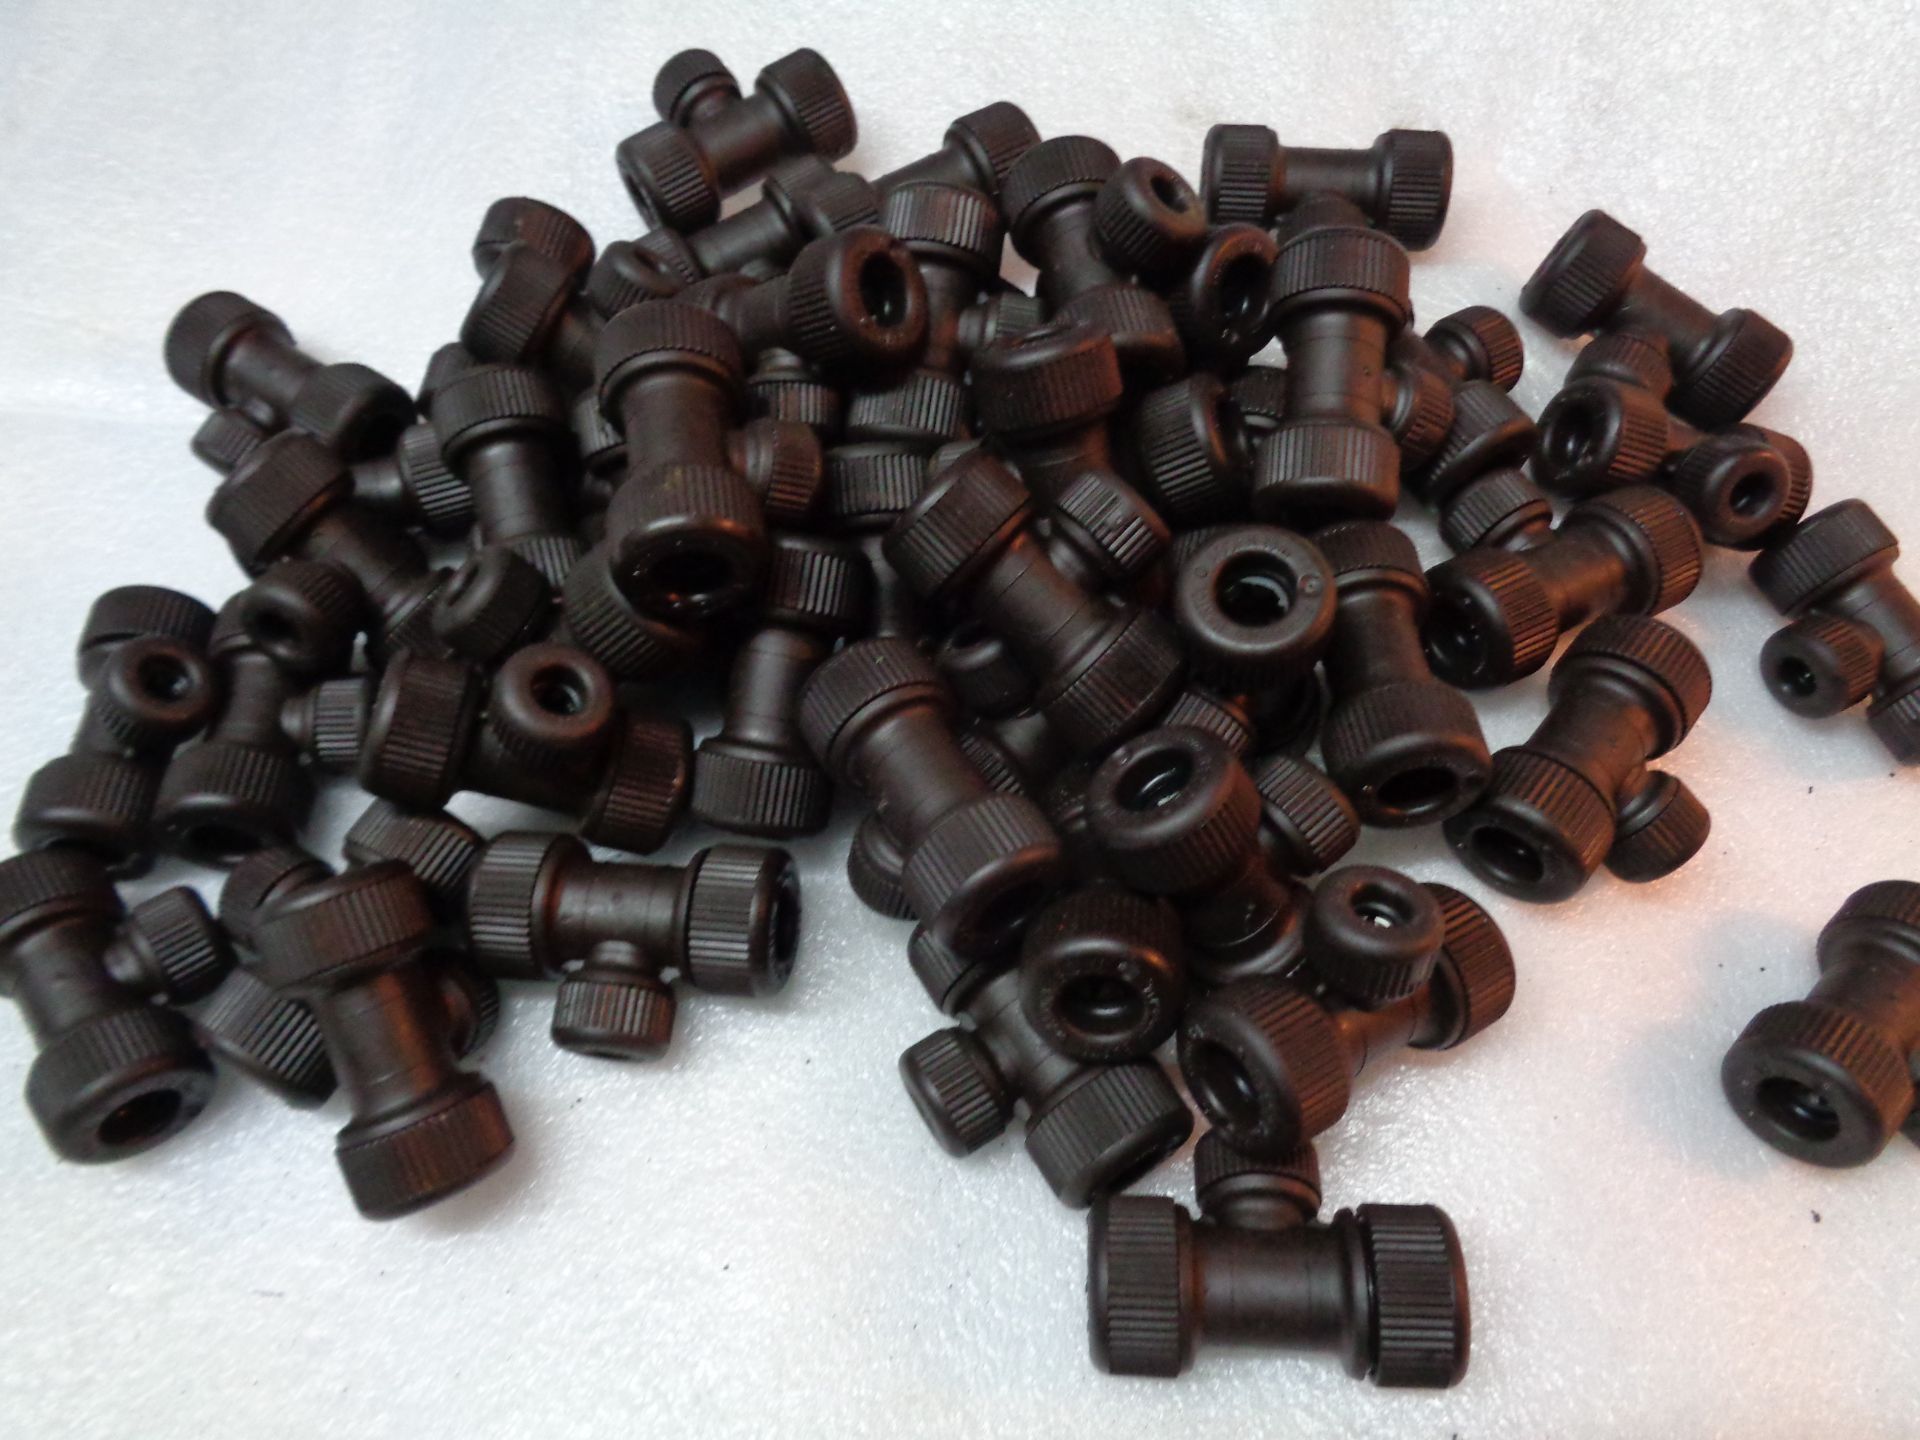 100 Approx - 15Mm X 15Mm X 10Mm Centre Reduced Tee Hep2 0 Type Brown Pus Fit / Demountable Fittings